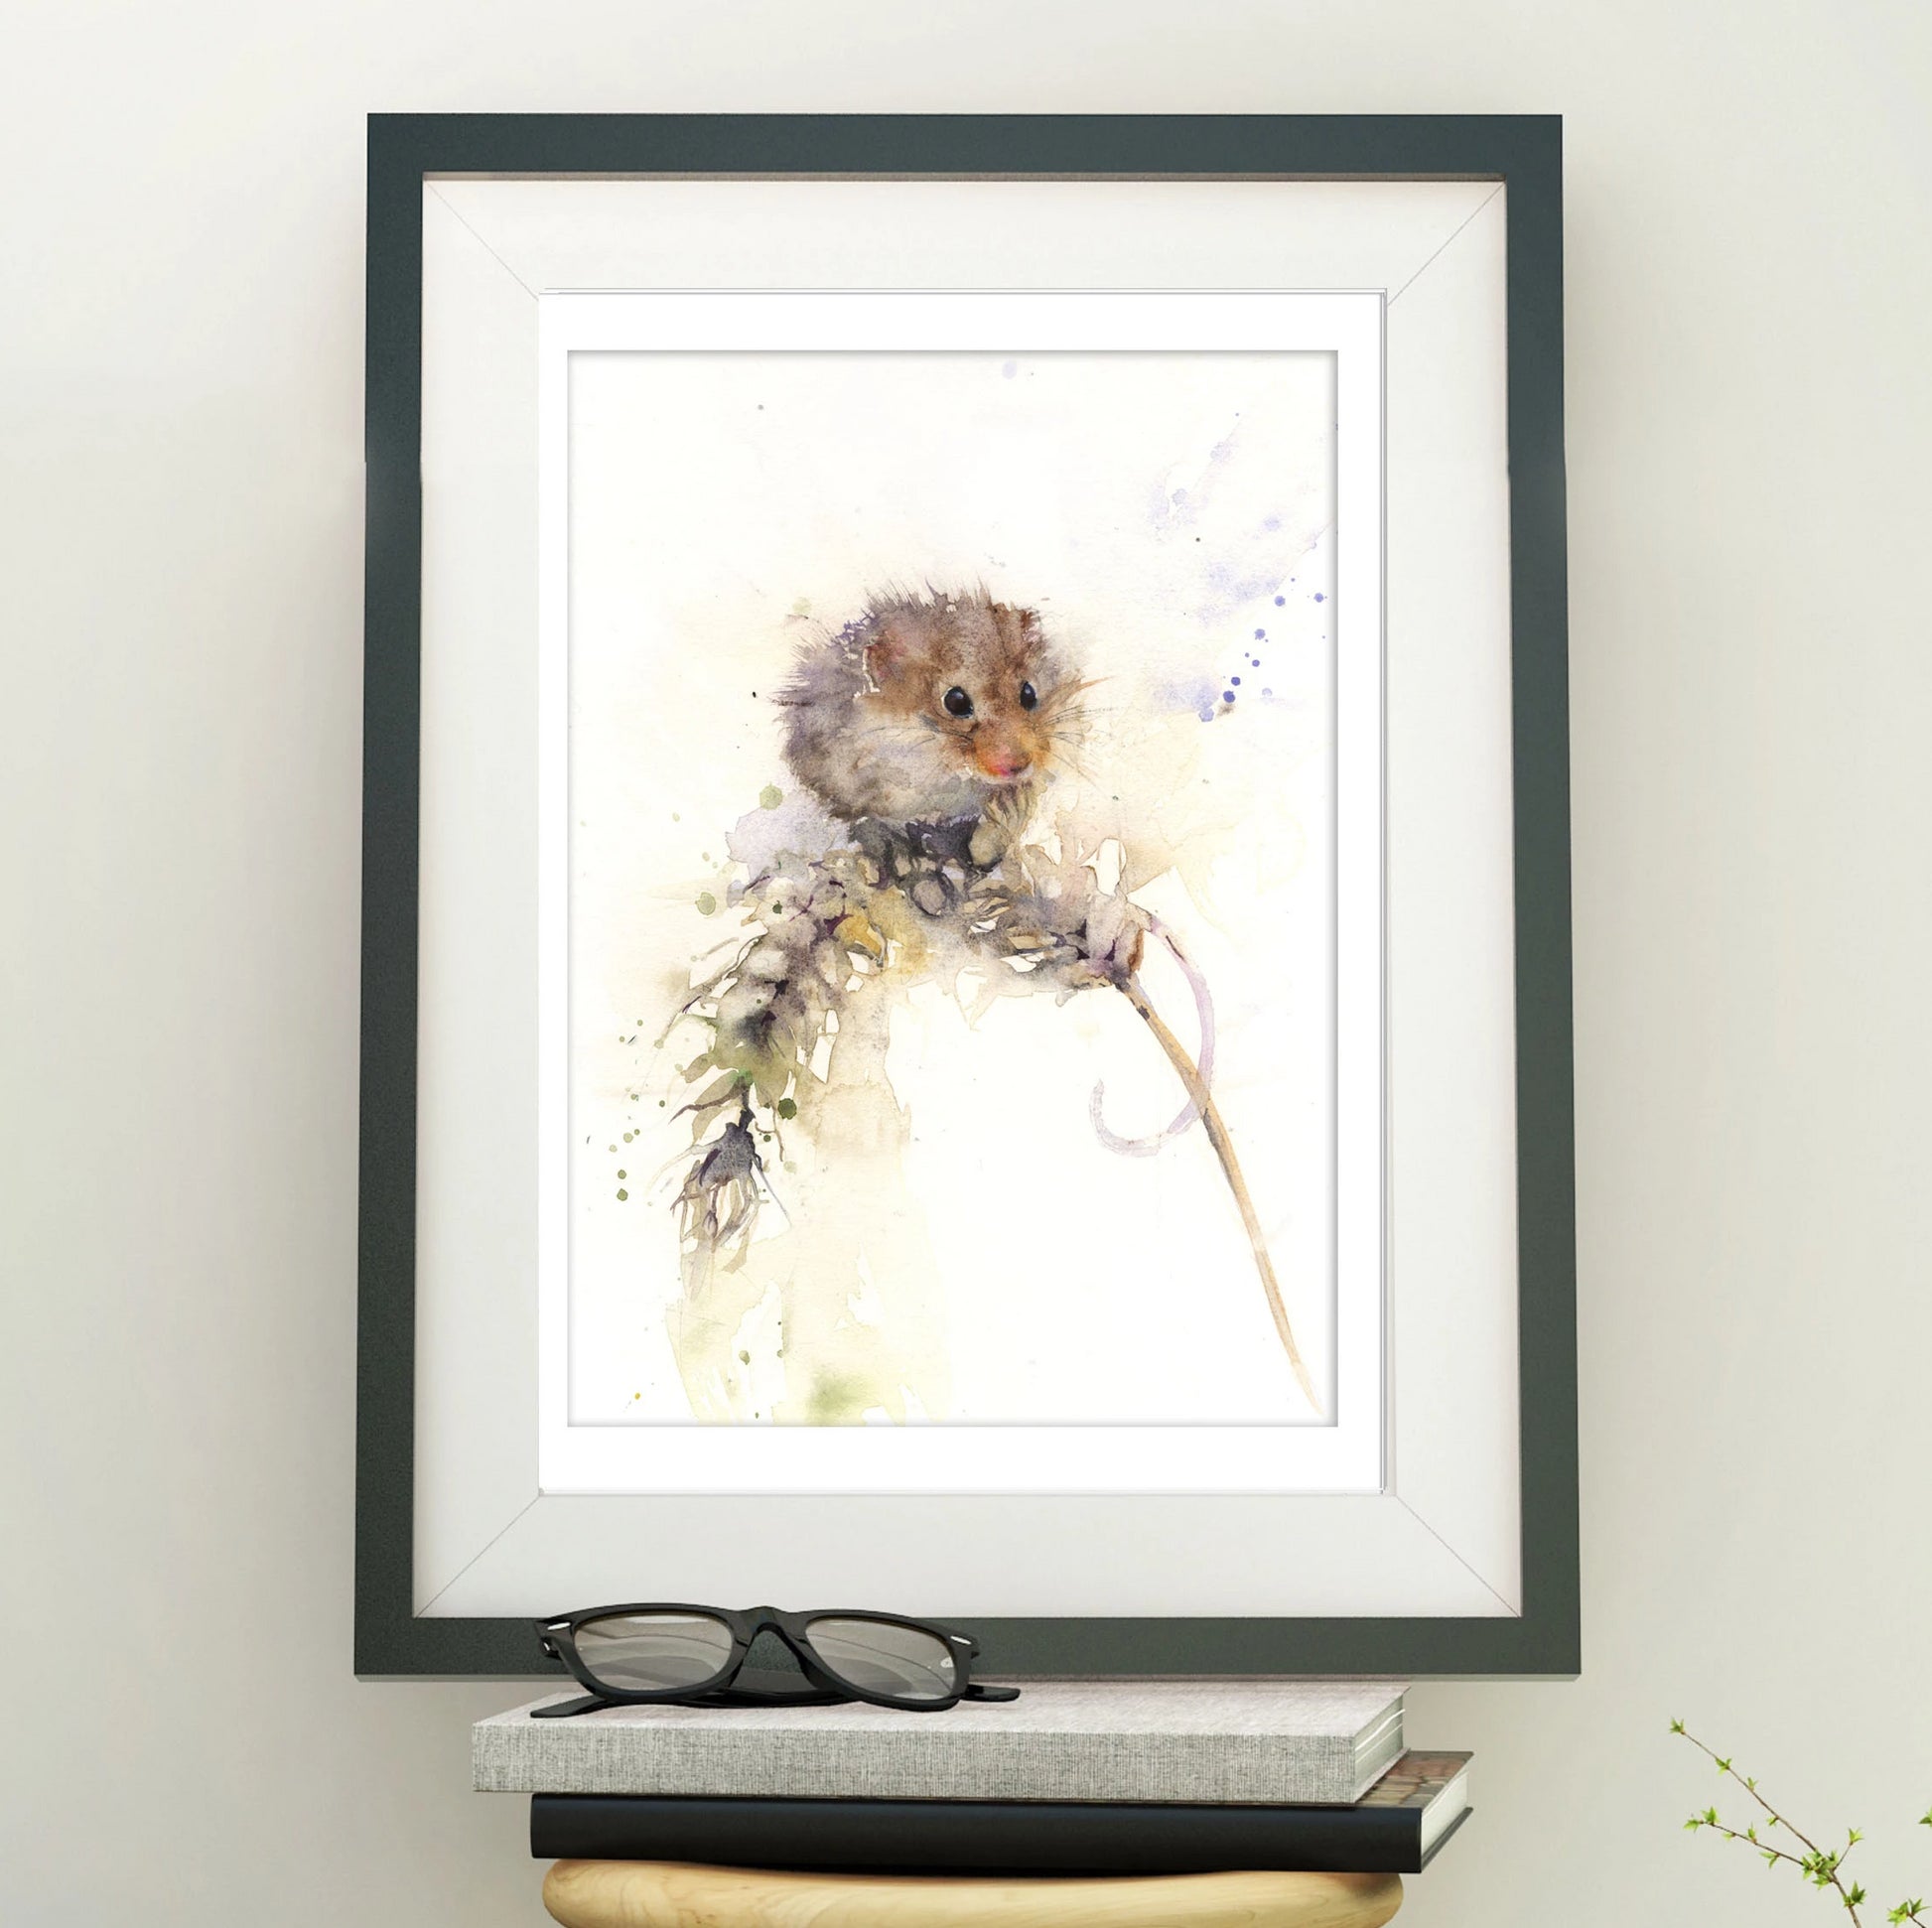 Original watercolour painting "Alice" field mouse on a ear of corn - Jen Buckley Art limited edition animal art prints